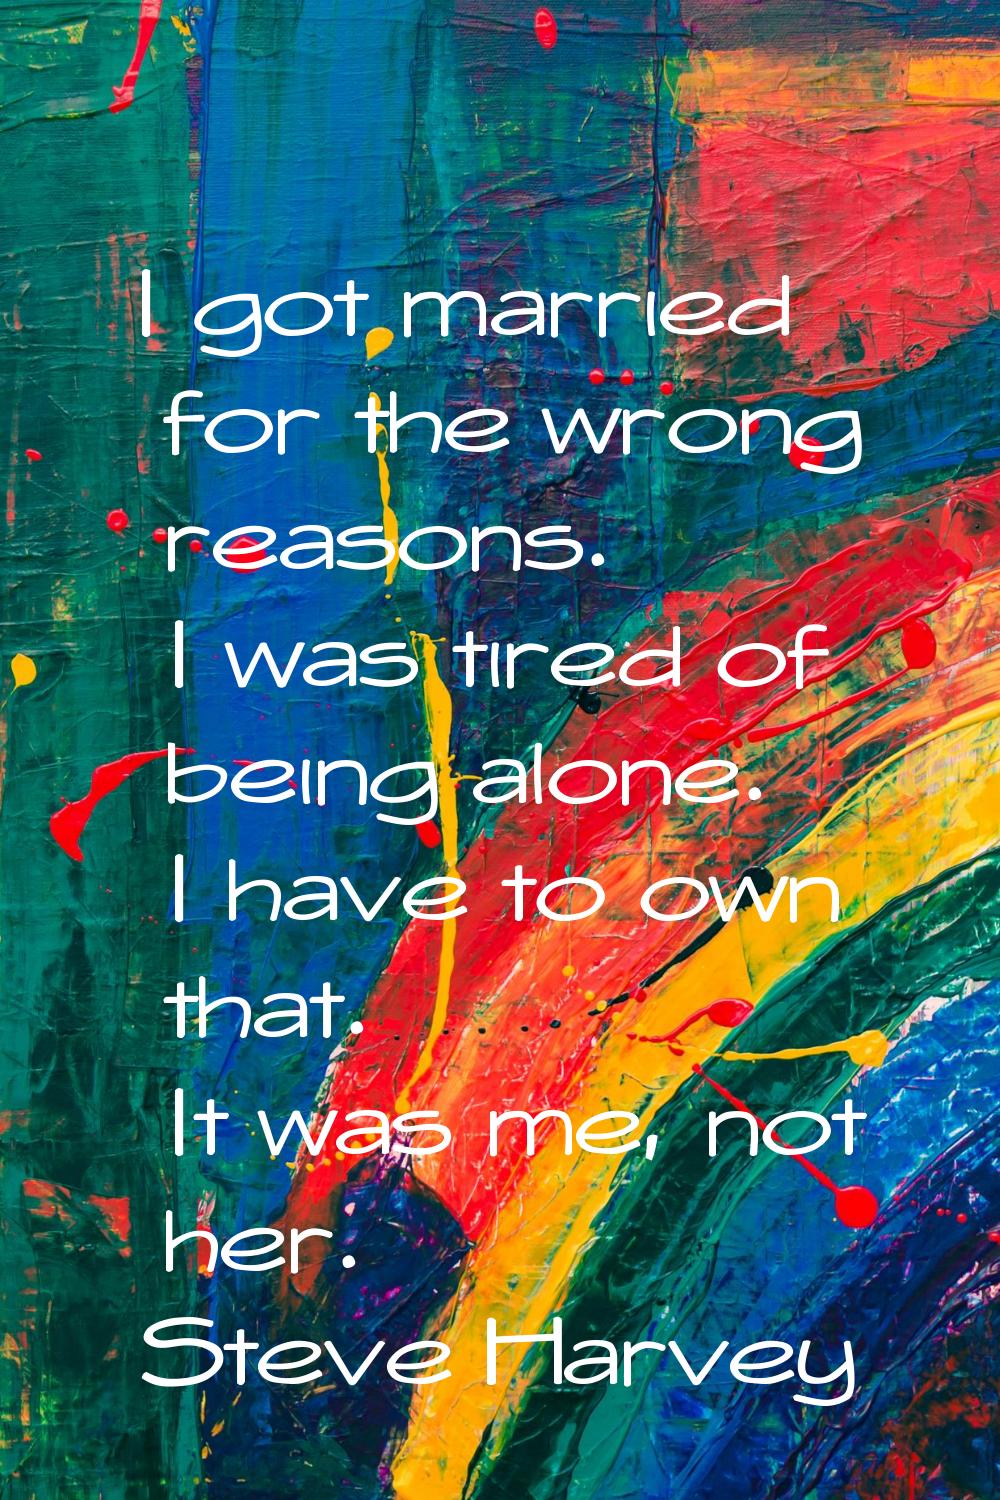 I got married for the wrong reasons. I was tired of being alone. I have to own that. It was me, not